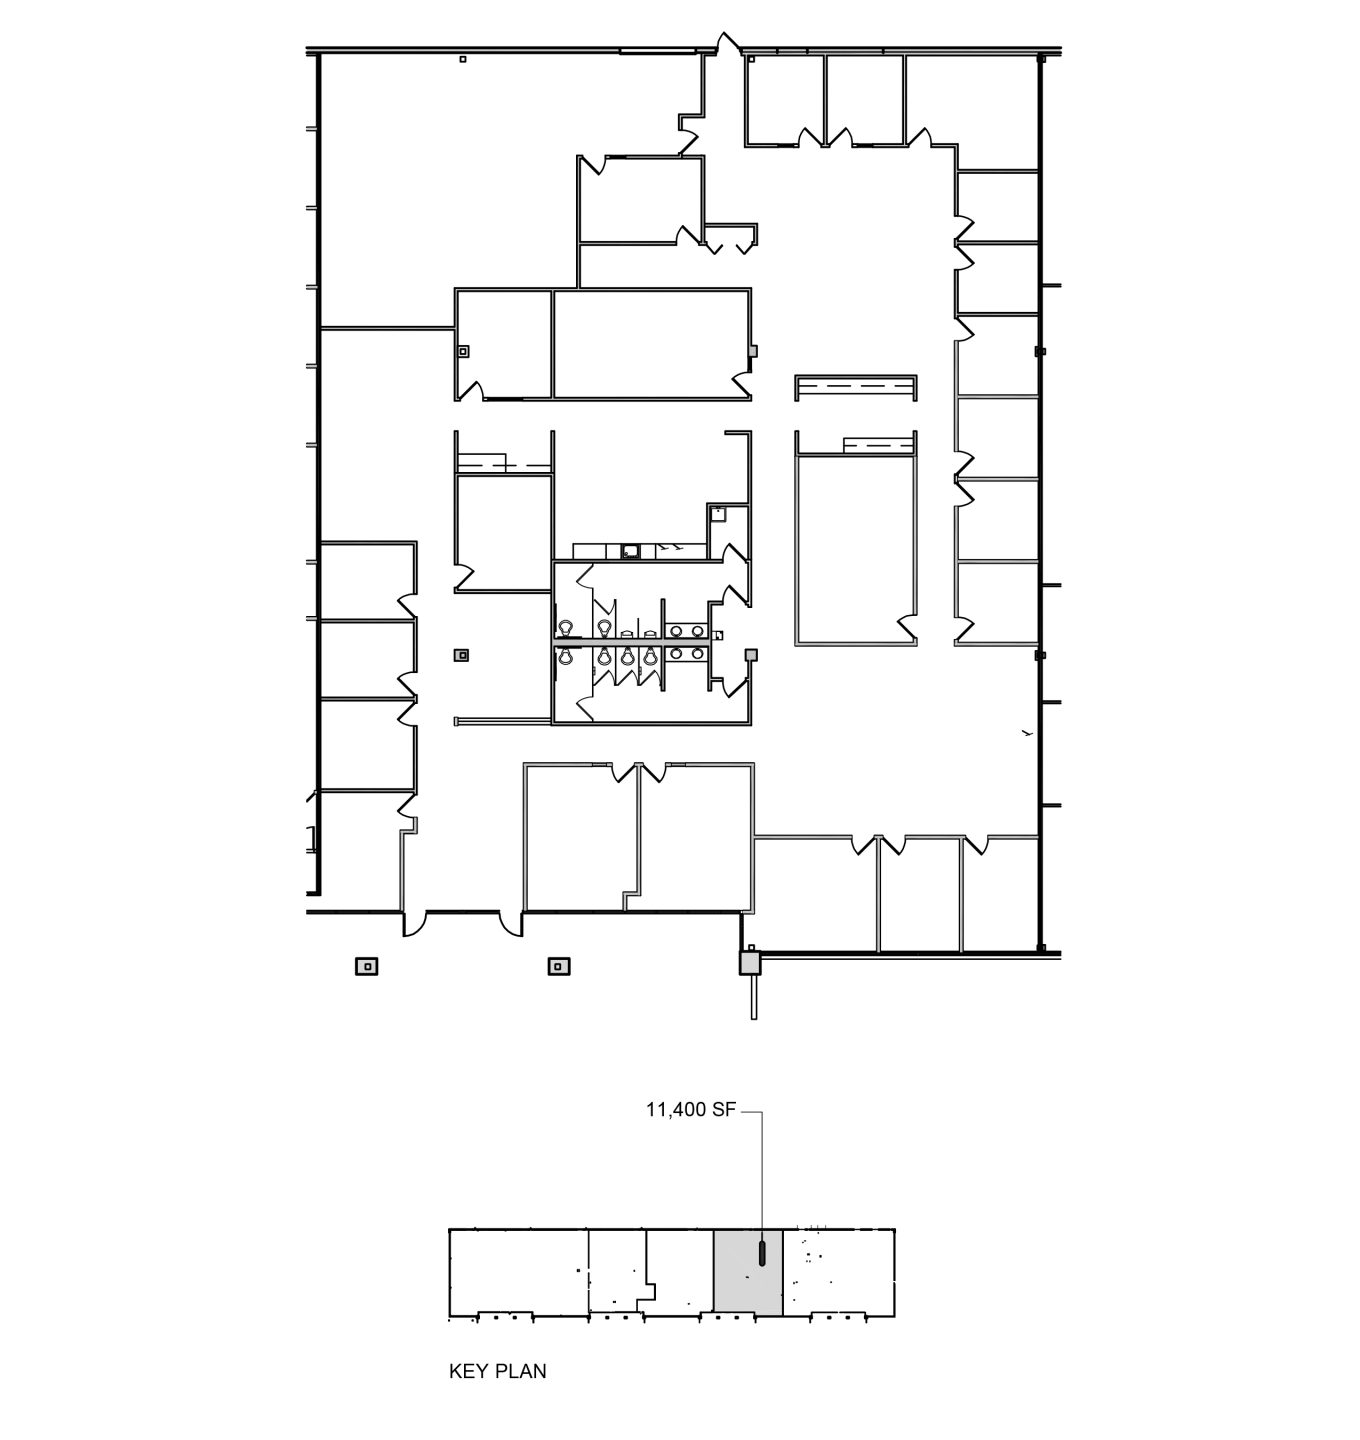 3771-3797 Corporate Center Drive - Photos and floorplans